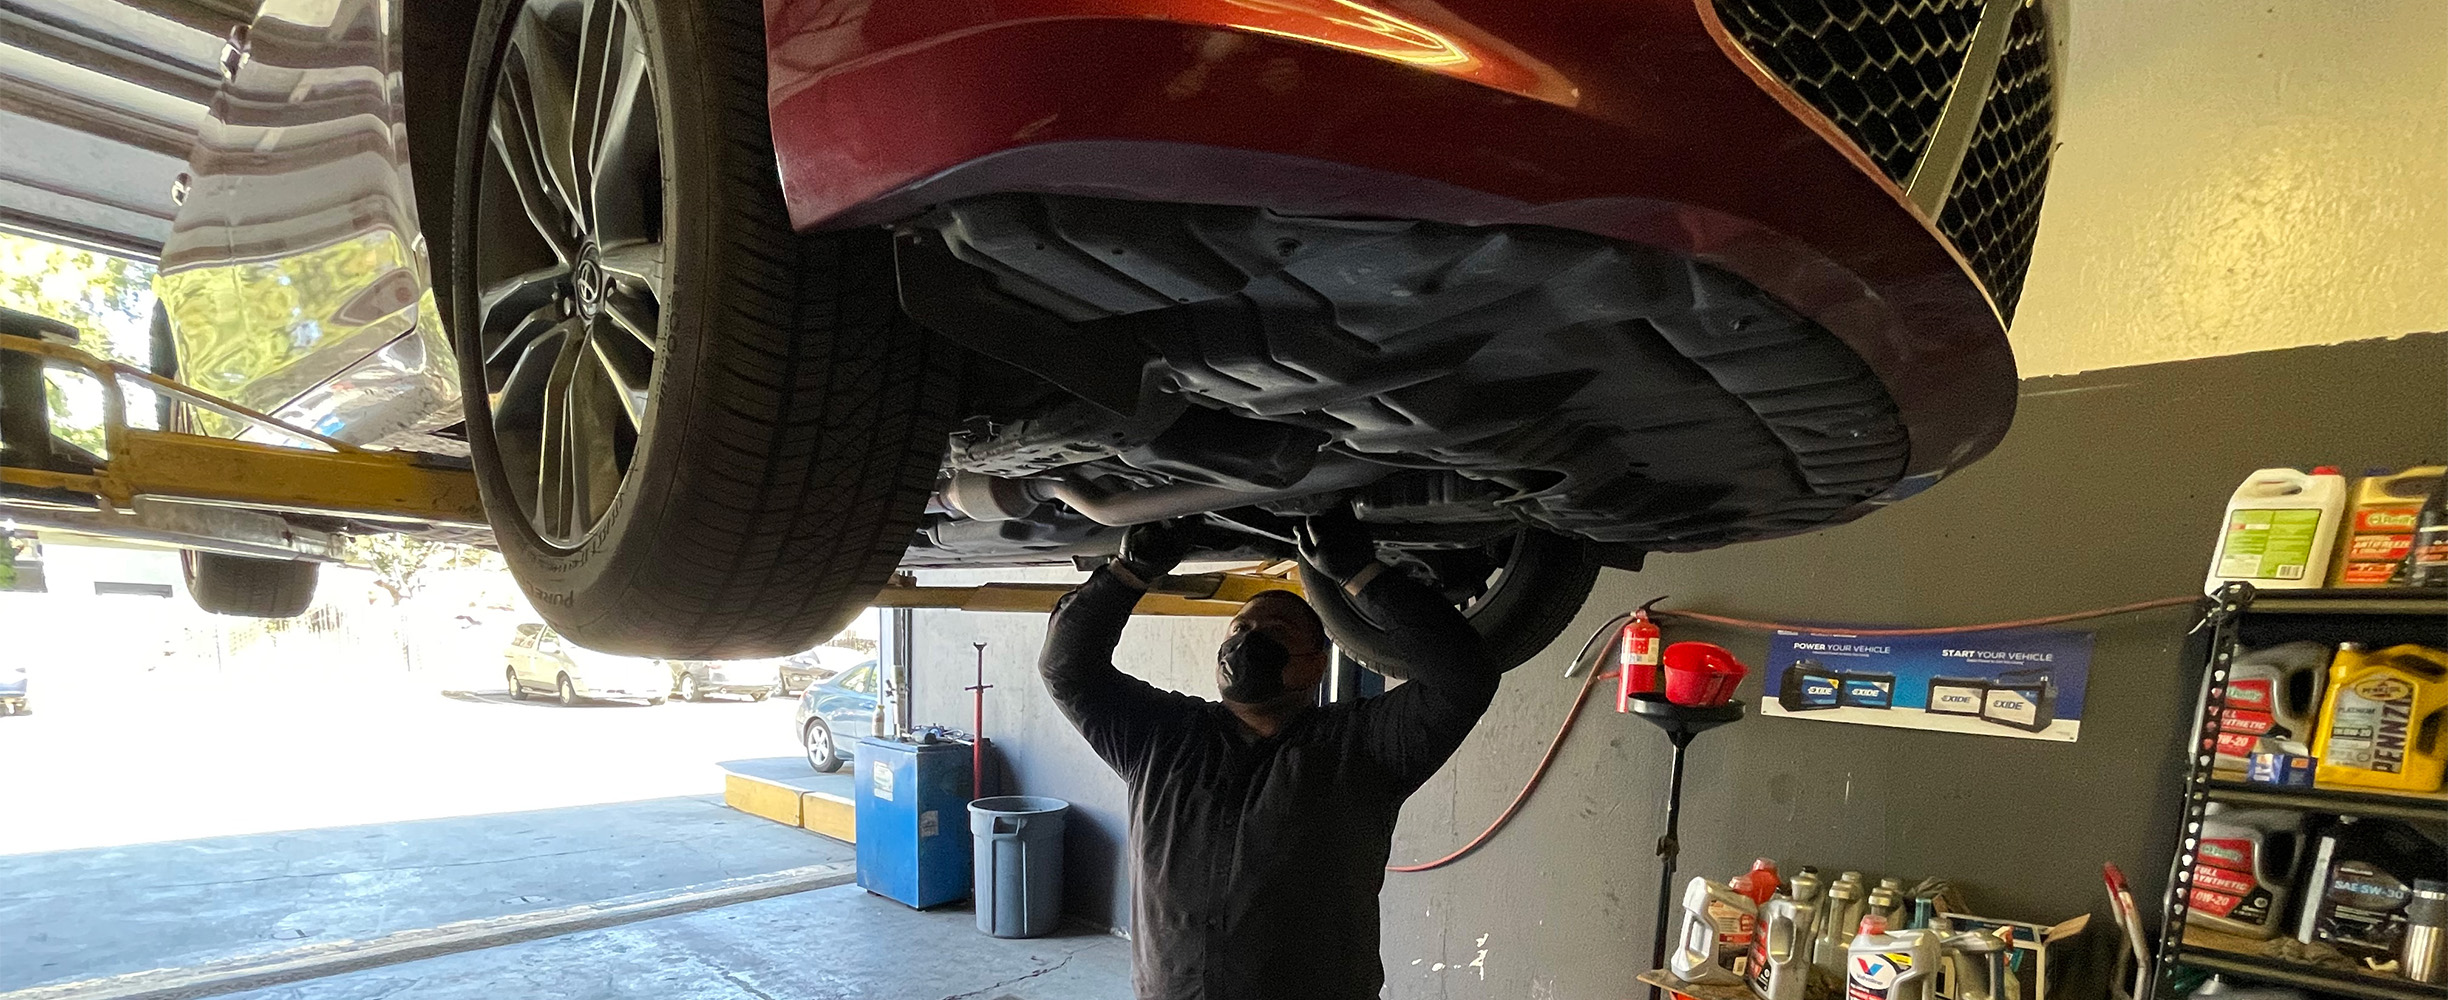 Brakes, shock absorbers, wheel balancing, tire rotation and new tires.